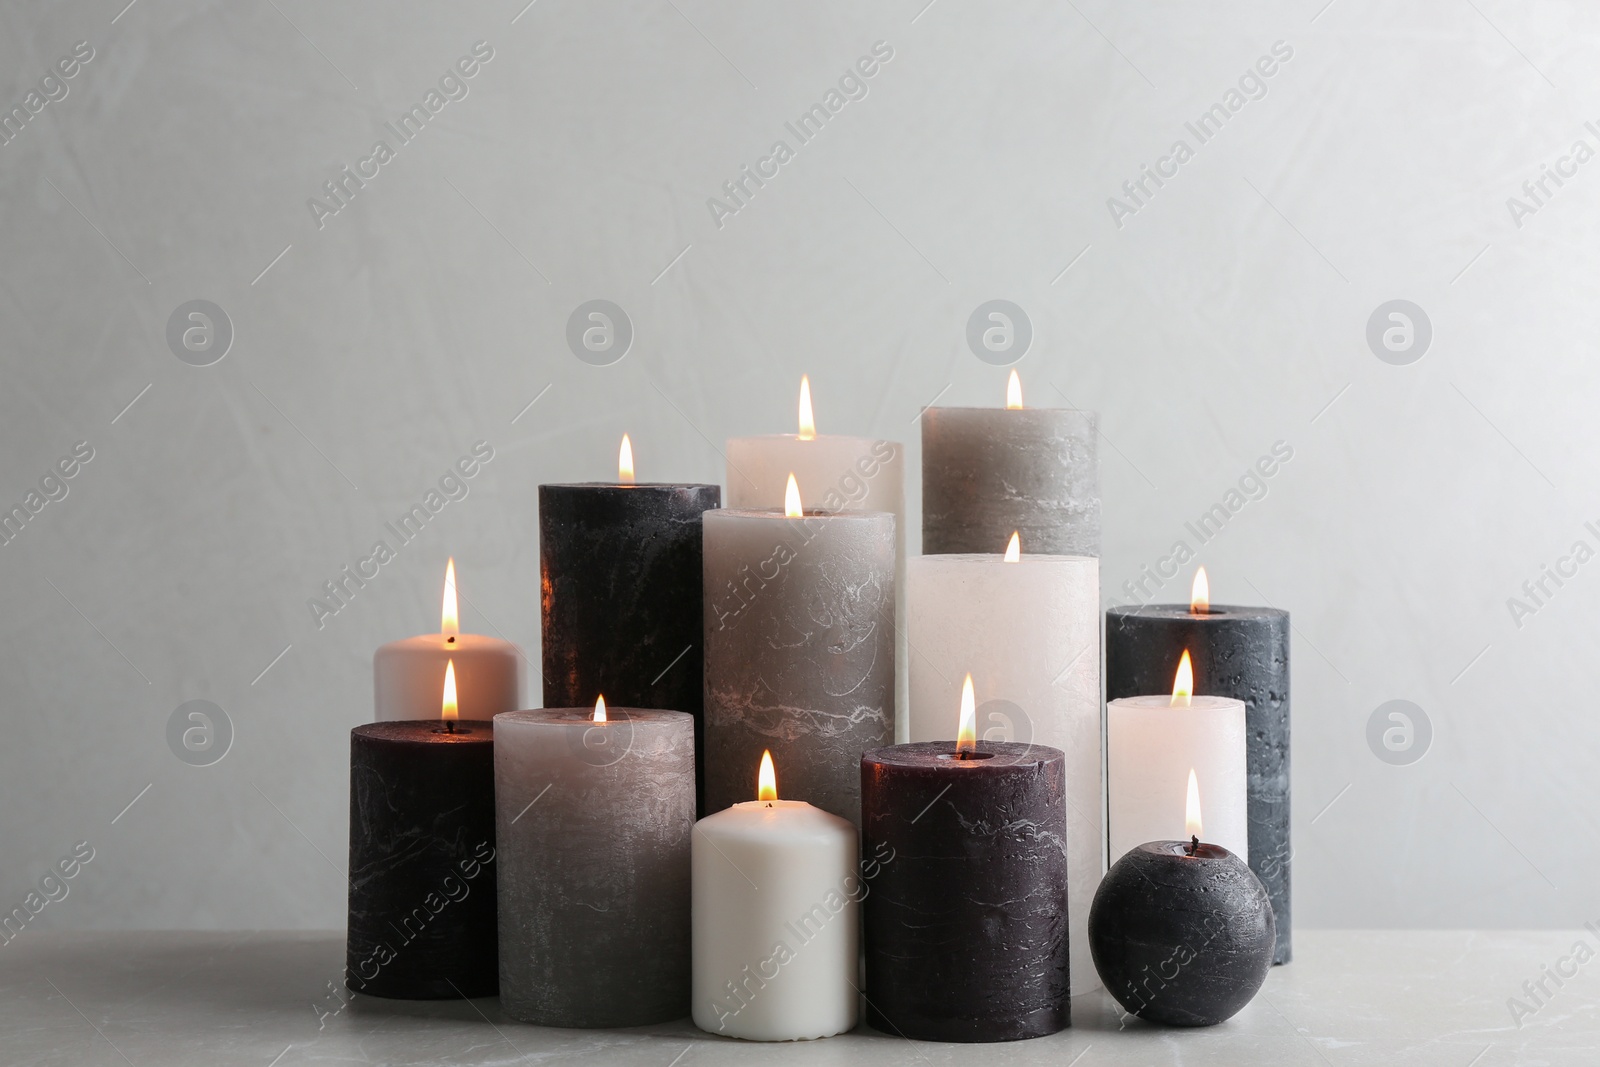 Photo of Set of burning candles on table against light background